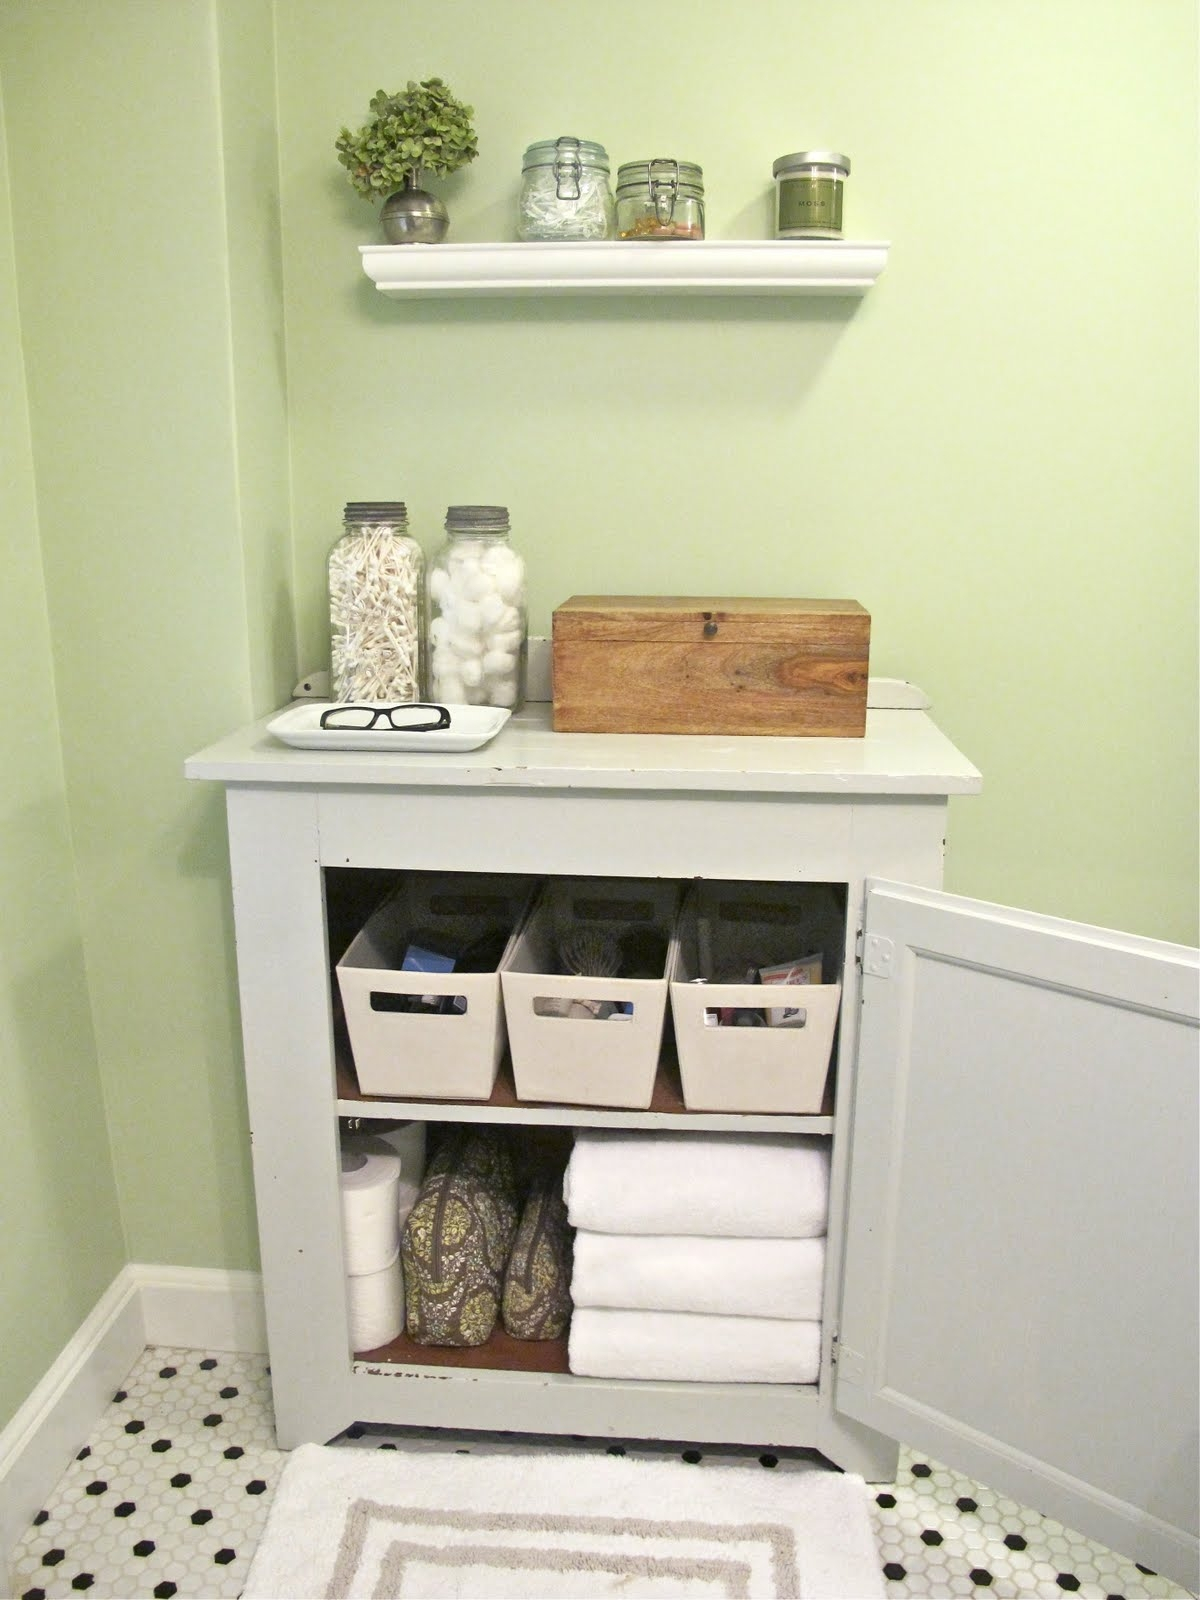 Storage Containers For Bathroom Cabinets Storage Cabinet pertaining to measurements 1200 X 1600